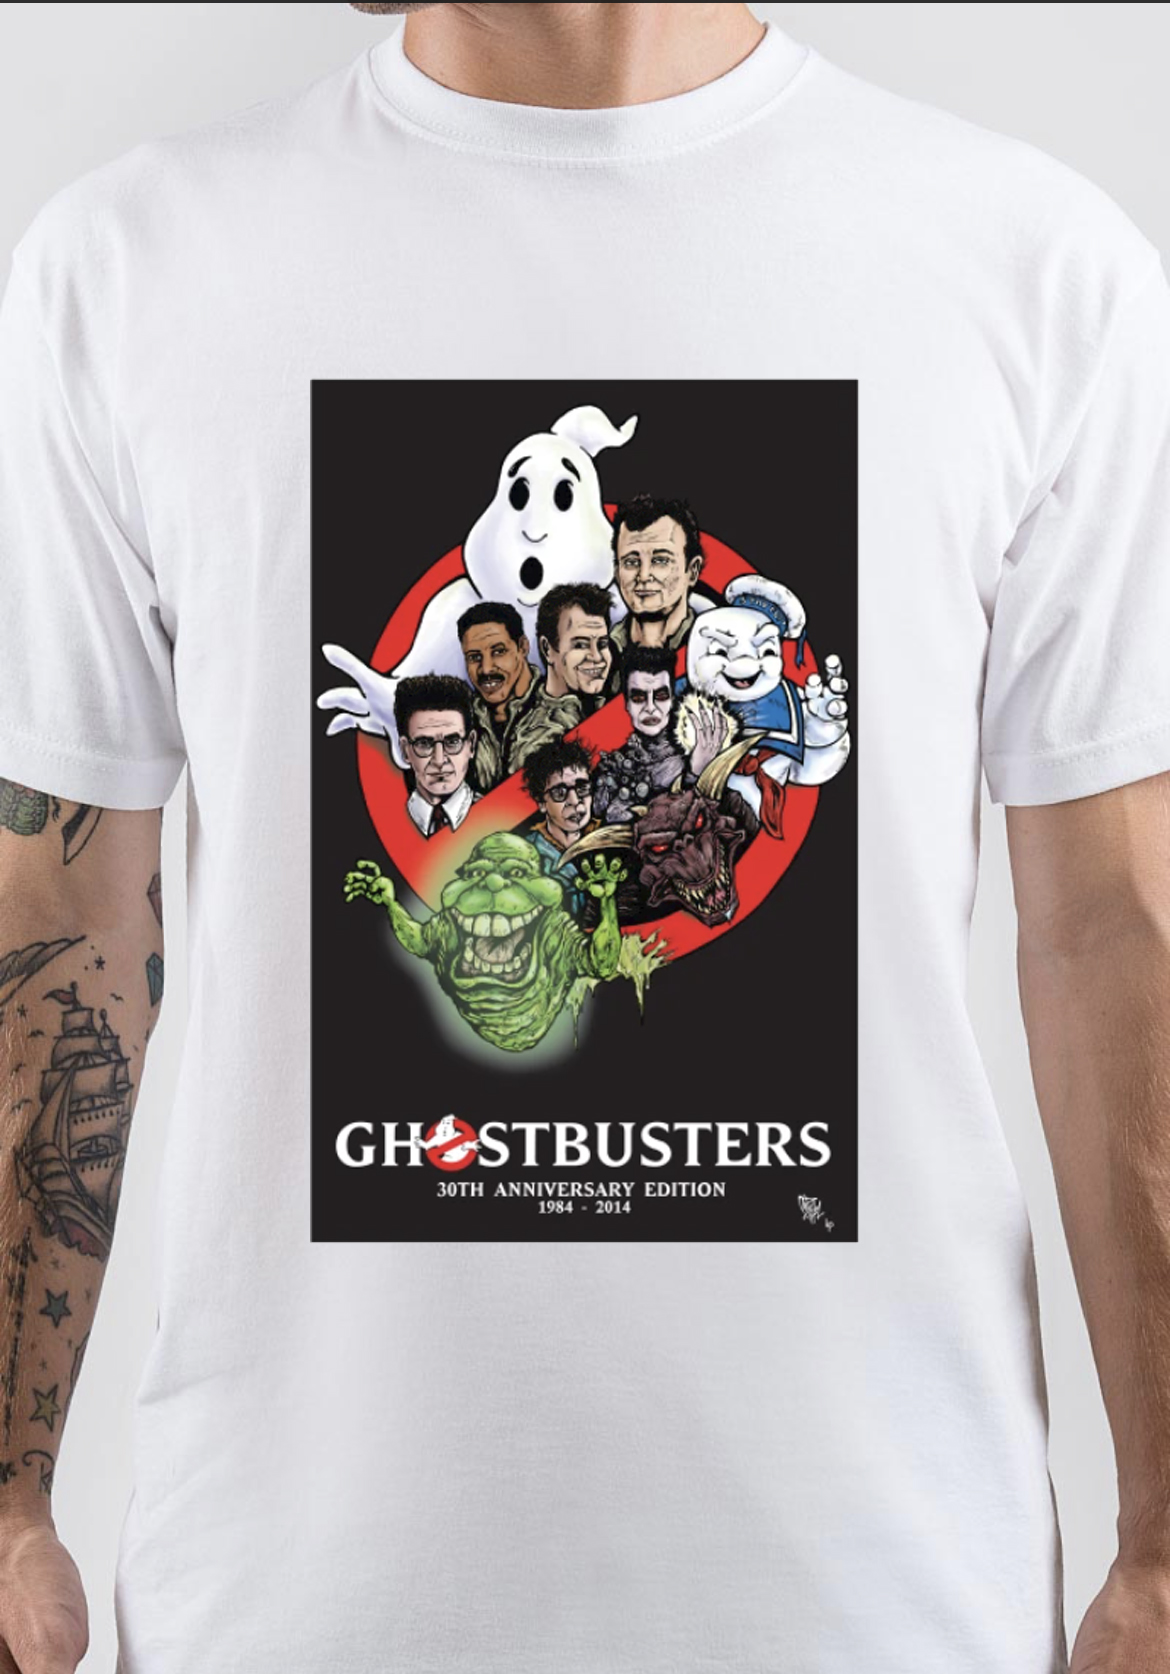 Ghostbusters T-Shirt - Swag Shirts